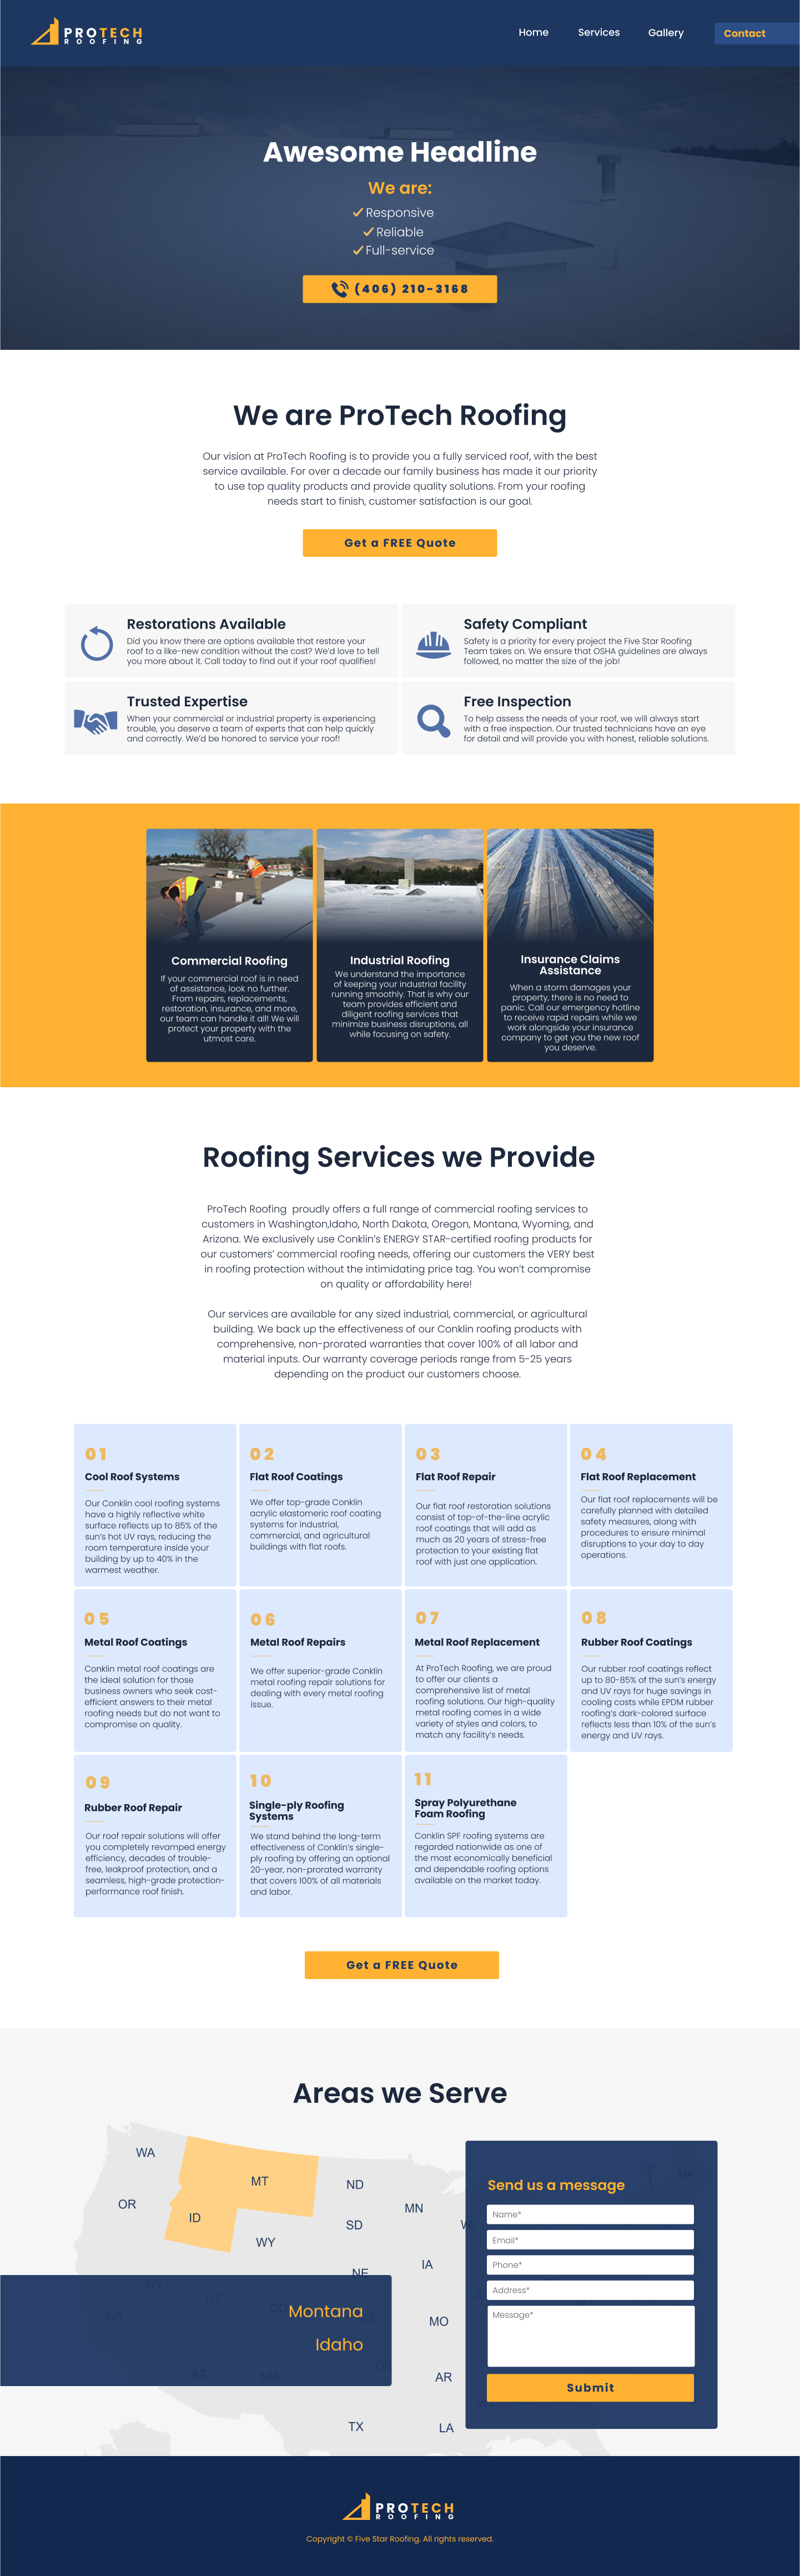 protech roofing website